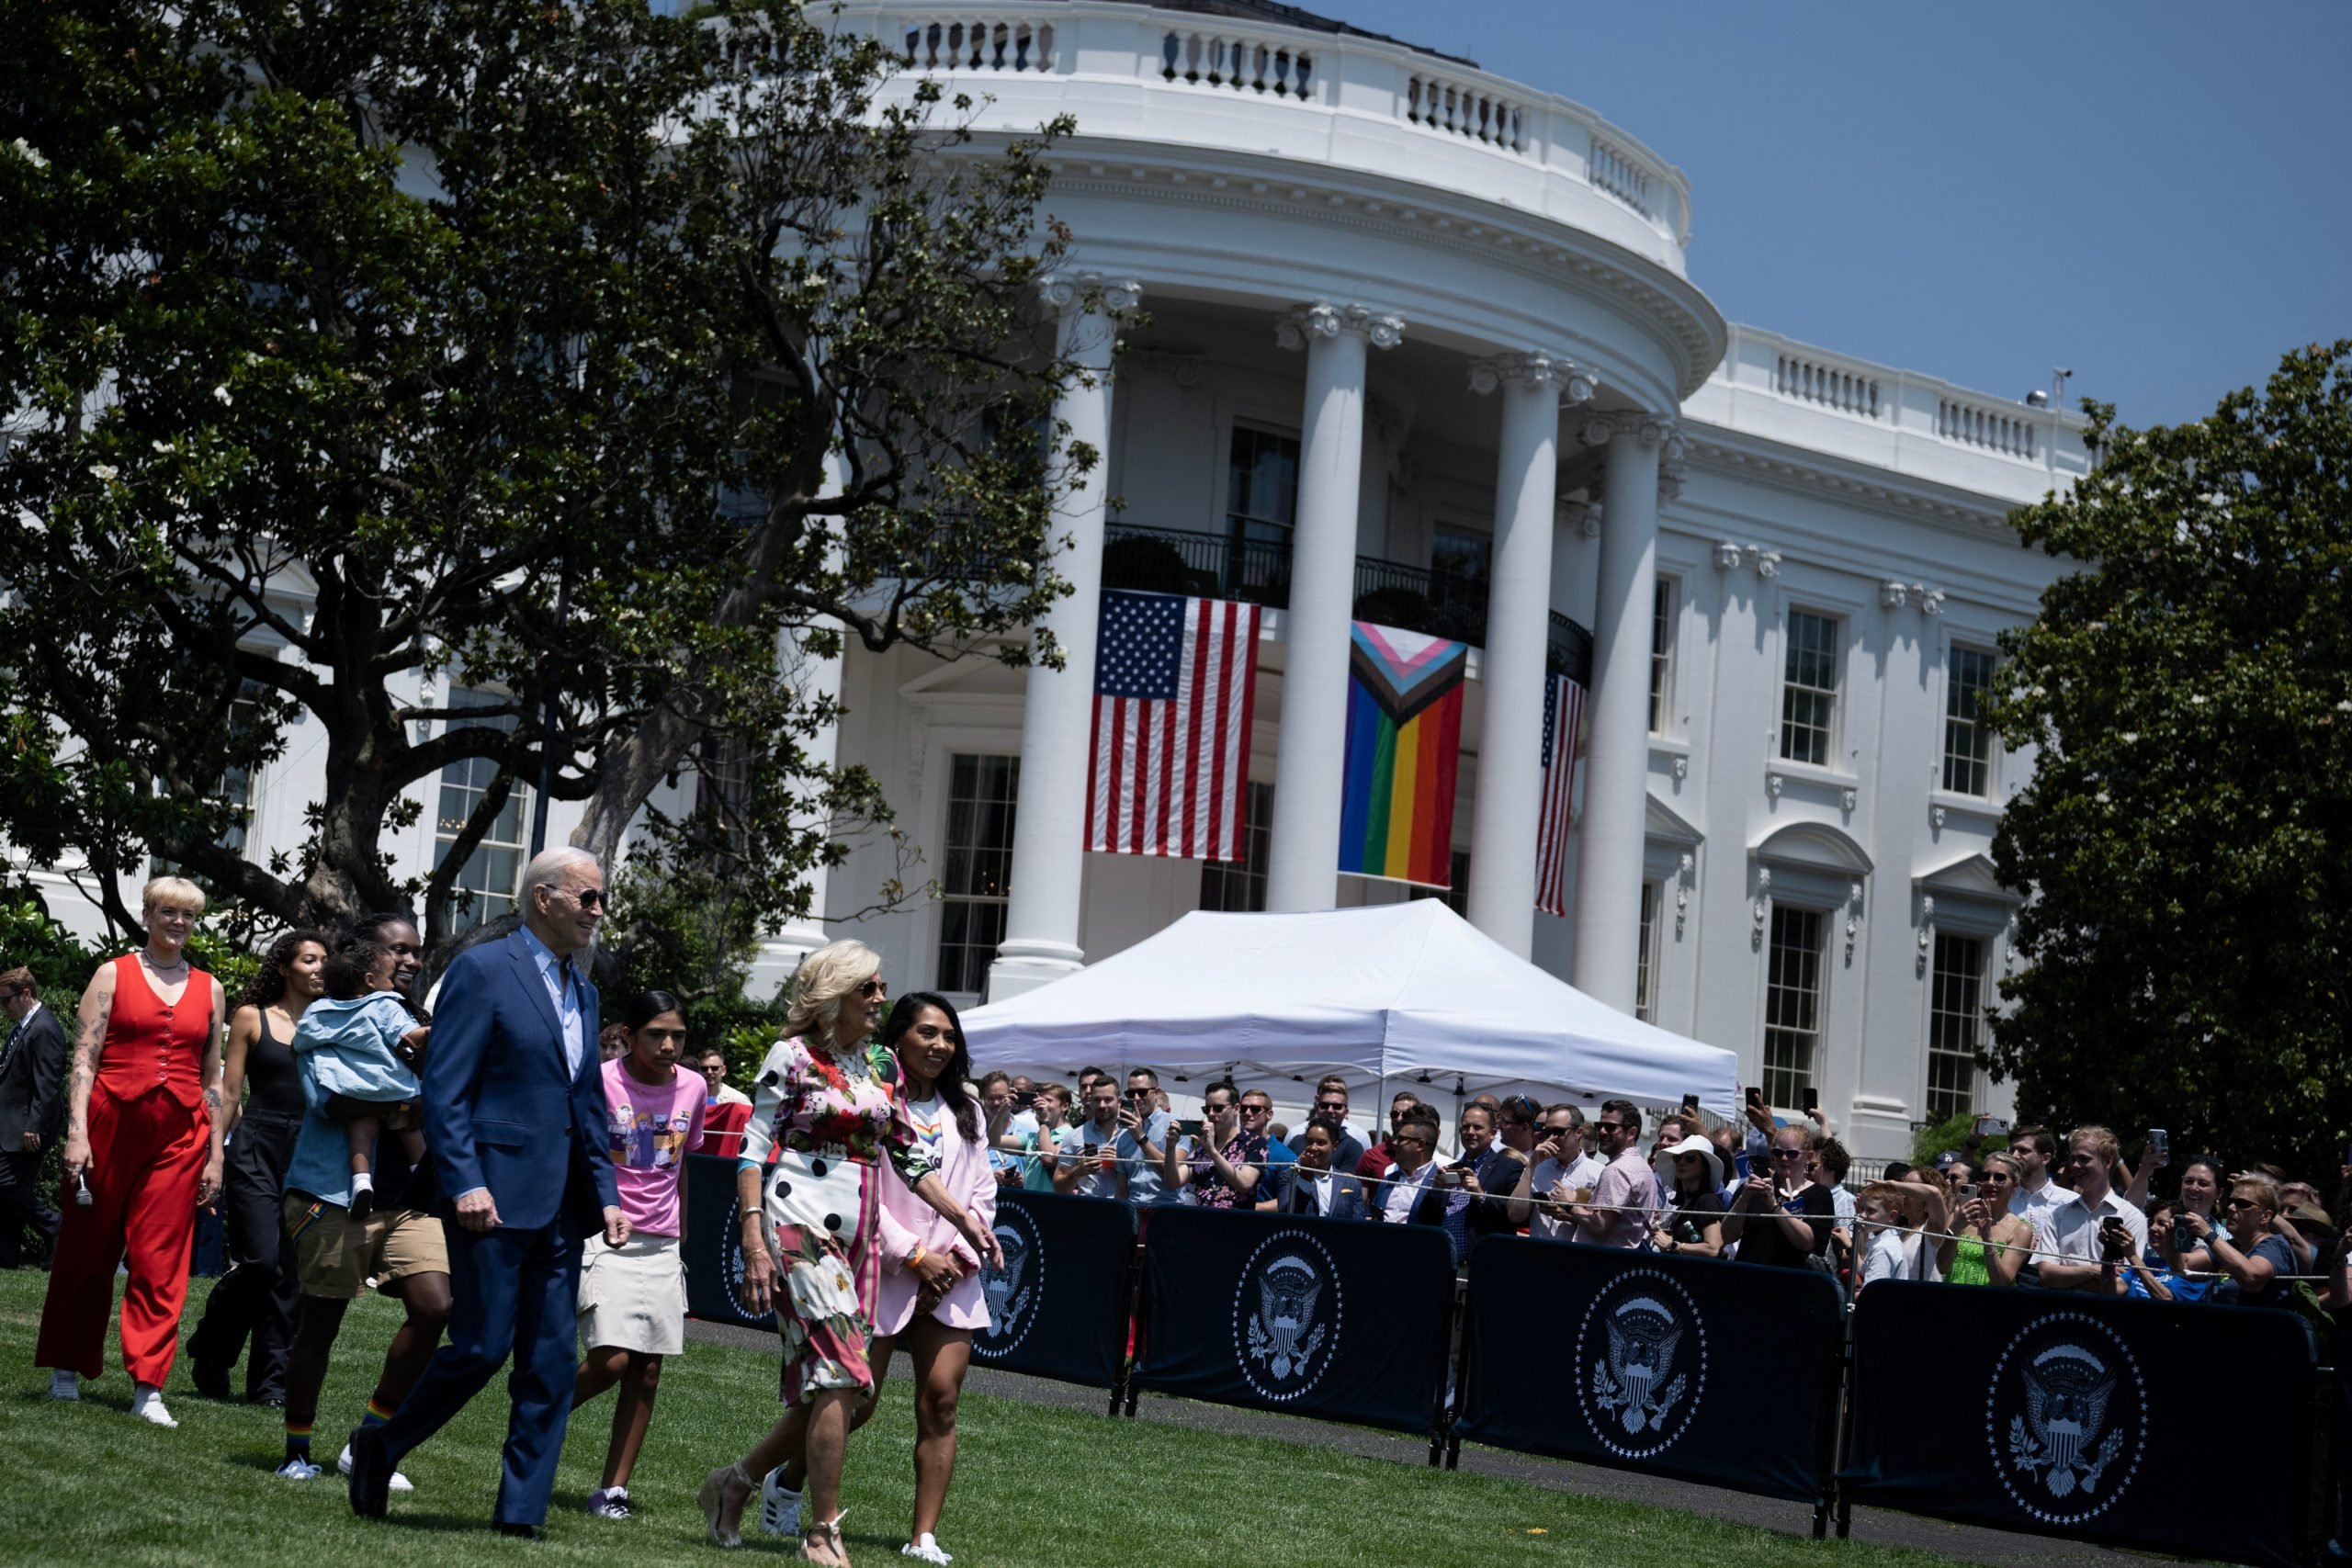 US President Joe Biden, US First Lady Jill Biden, and Australian-US singer-songwriter Betty Who arrive for a Pride celebration on the South Lawn of the White House in Washington, DC, on June 10, 2023. (Photo by Brendan Smialowski / AFP) (Photo by BRENDAN SMIALOWSKI/AFP via Getty Images)